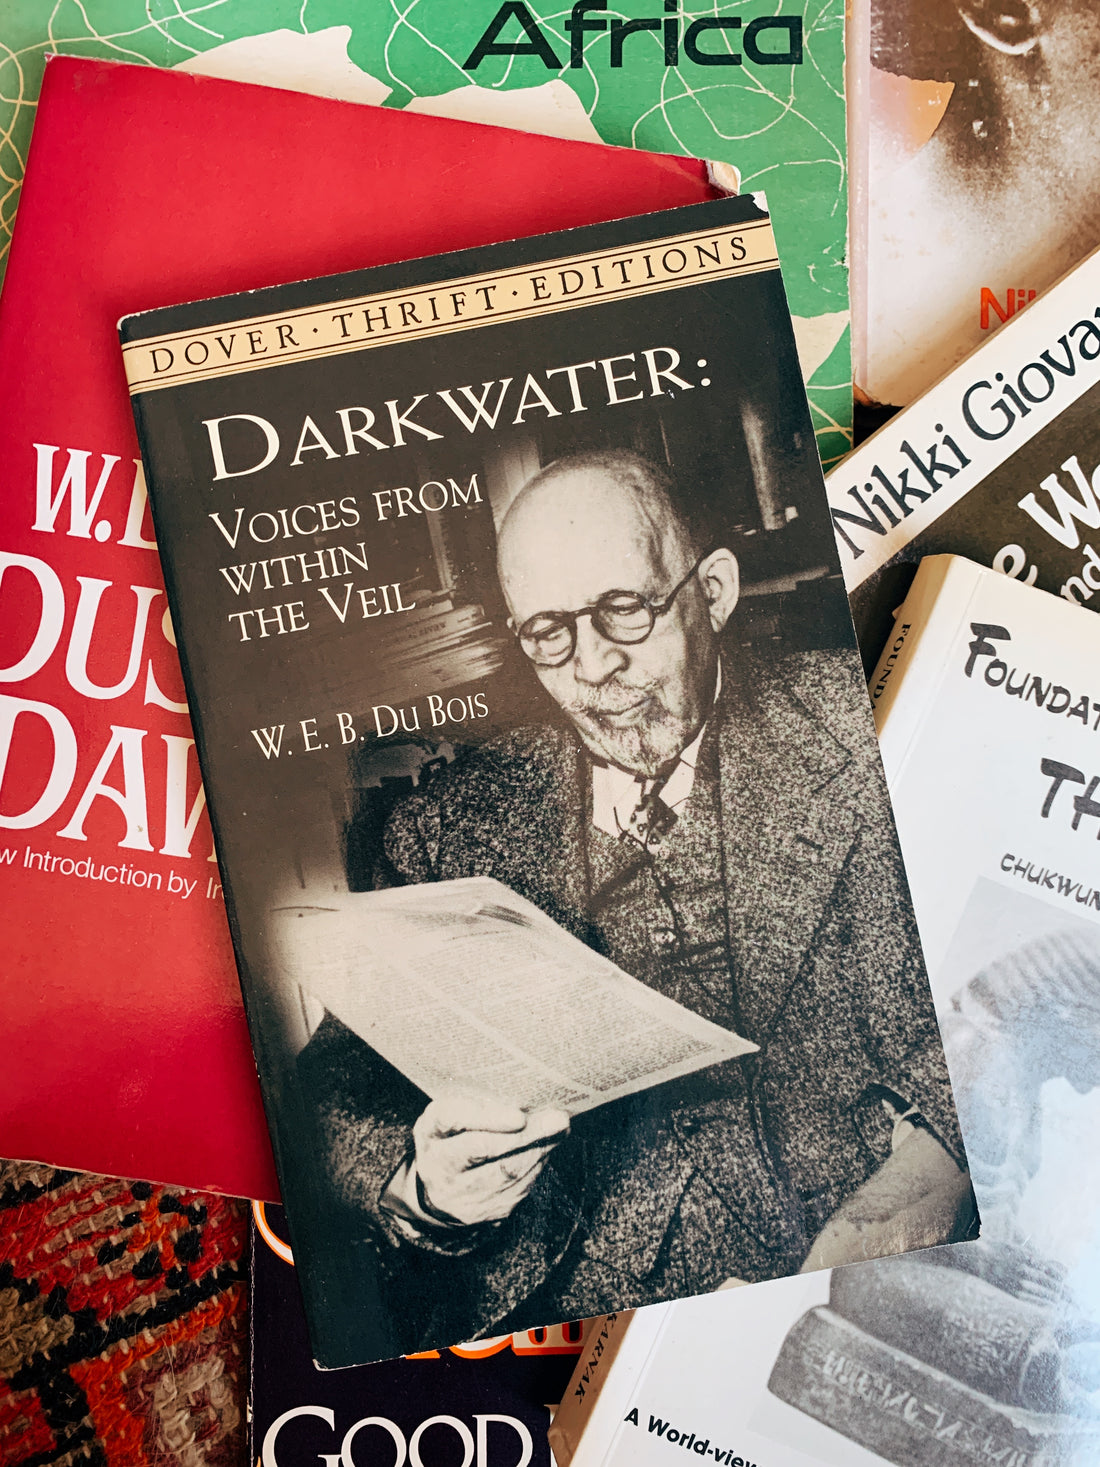 Vintage &quot;Darkwater: Voices From Within The Veil” by W.E.B. DuBois (1999)